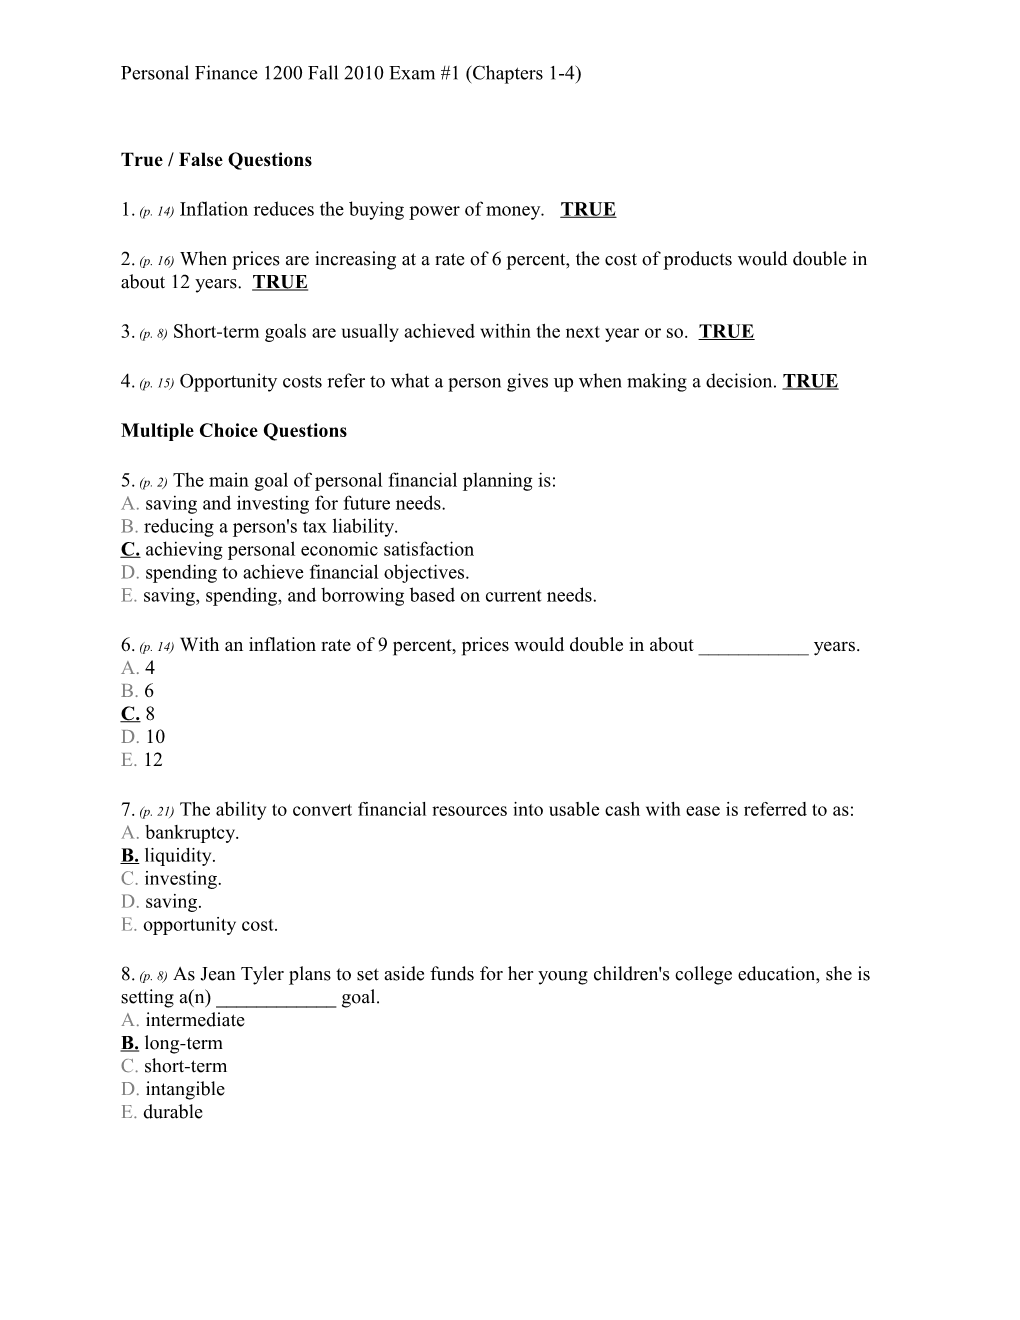 Personal Finance 1200 Fall 2010 Exam #1 (Chapters 1-4)